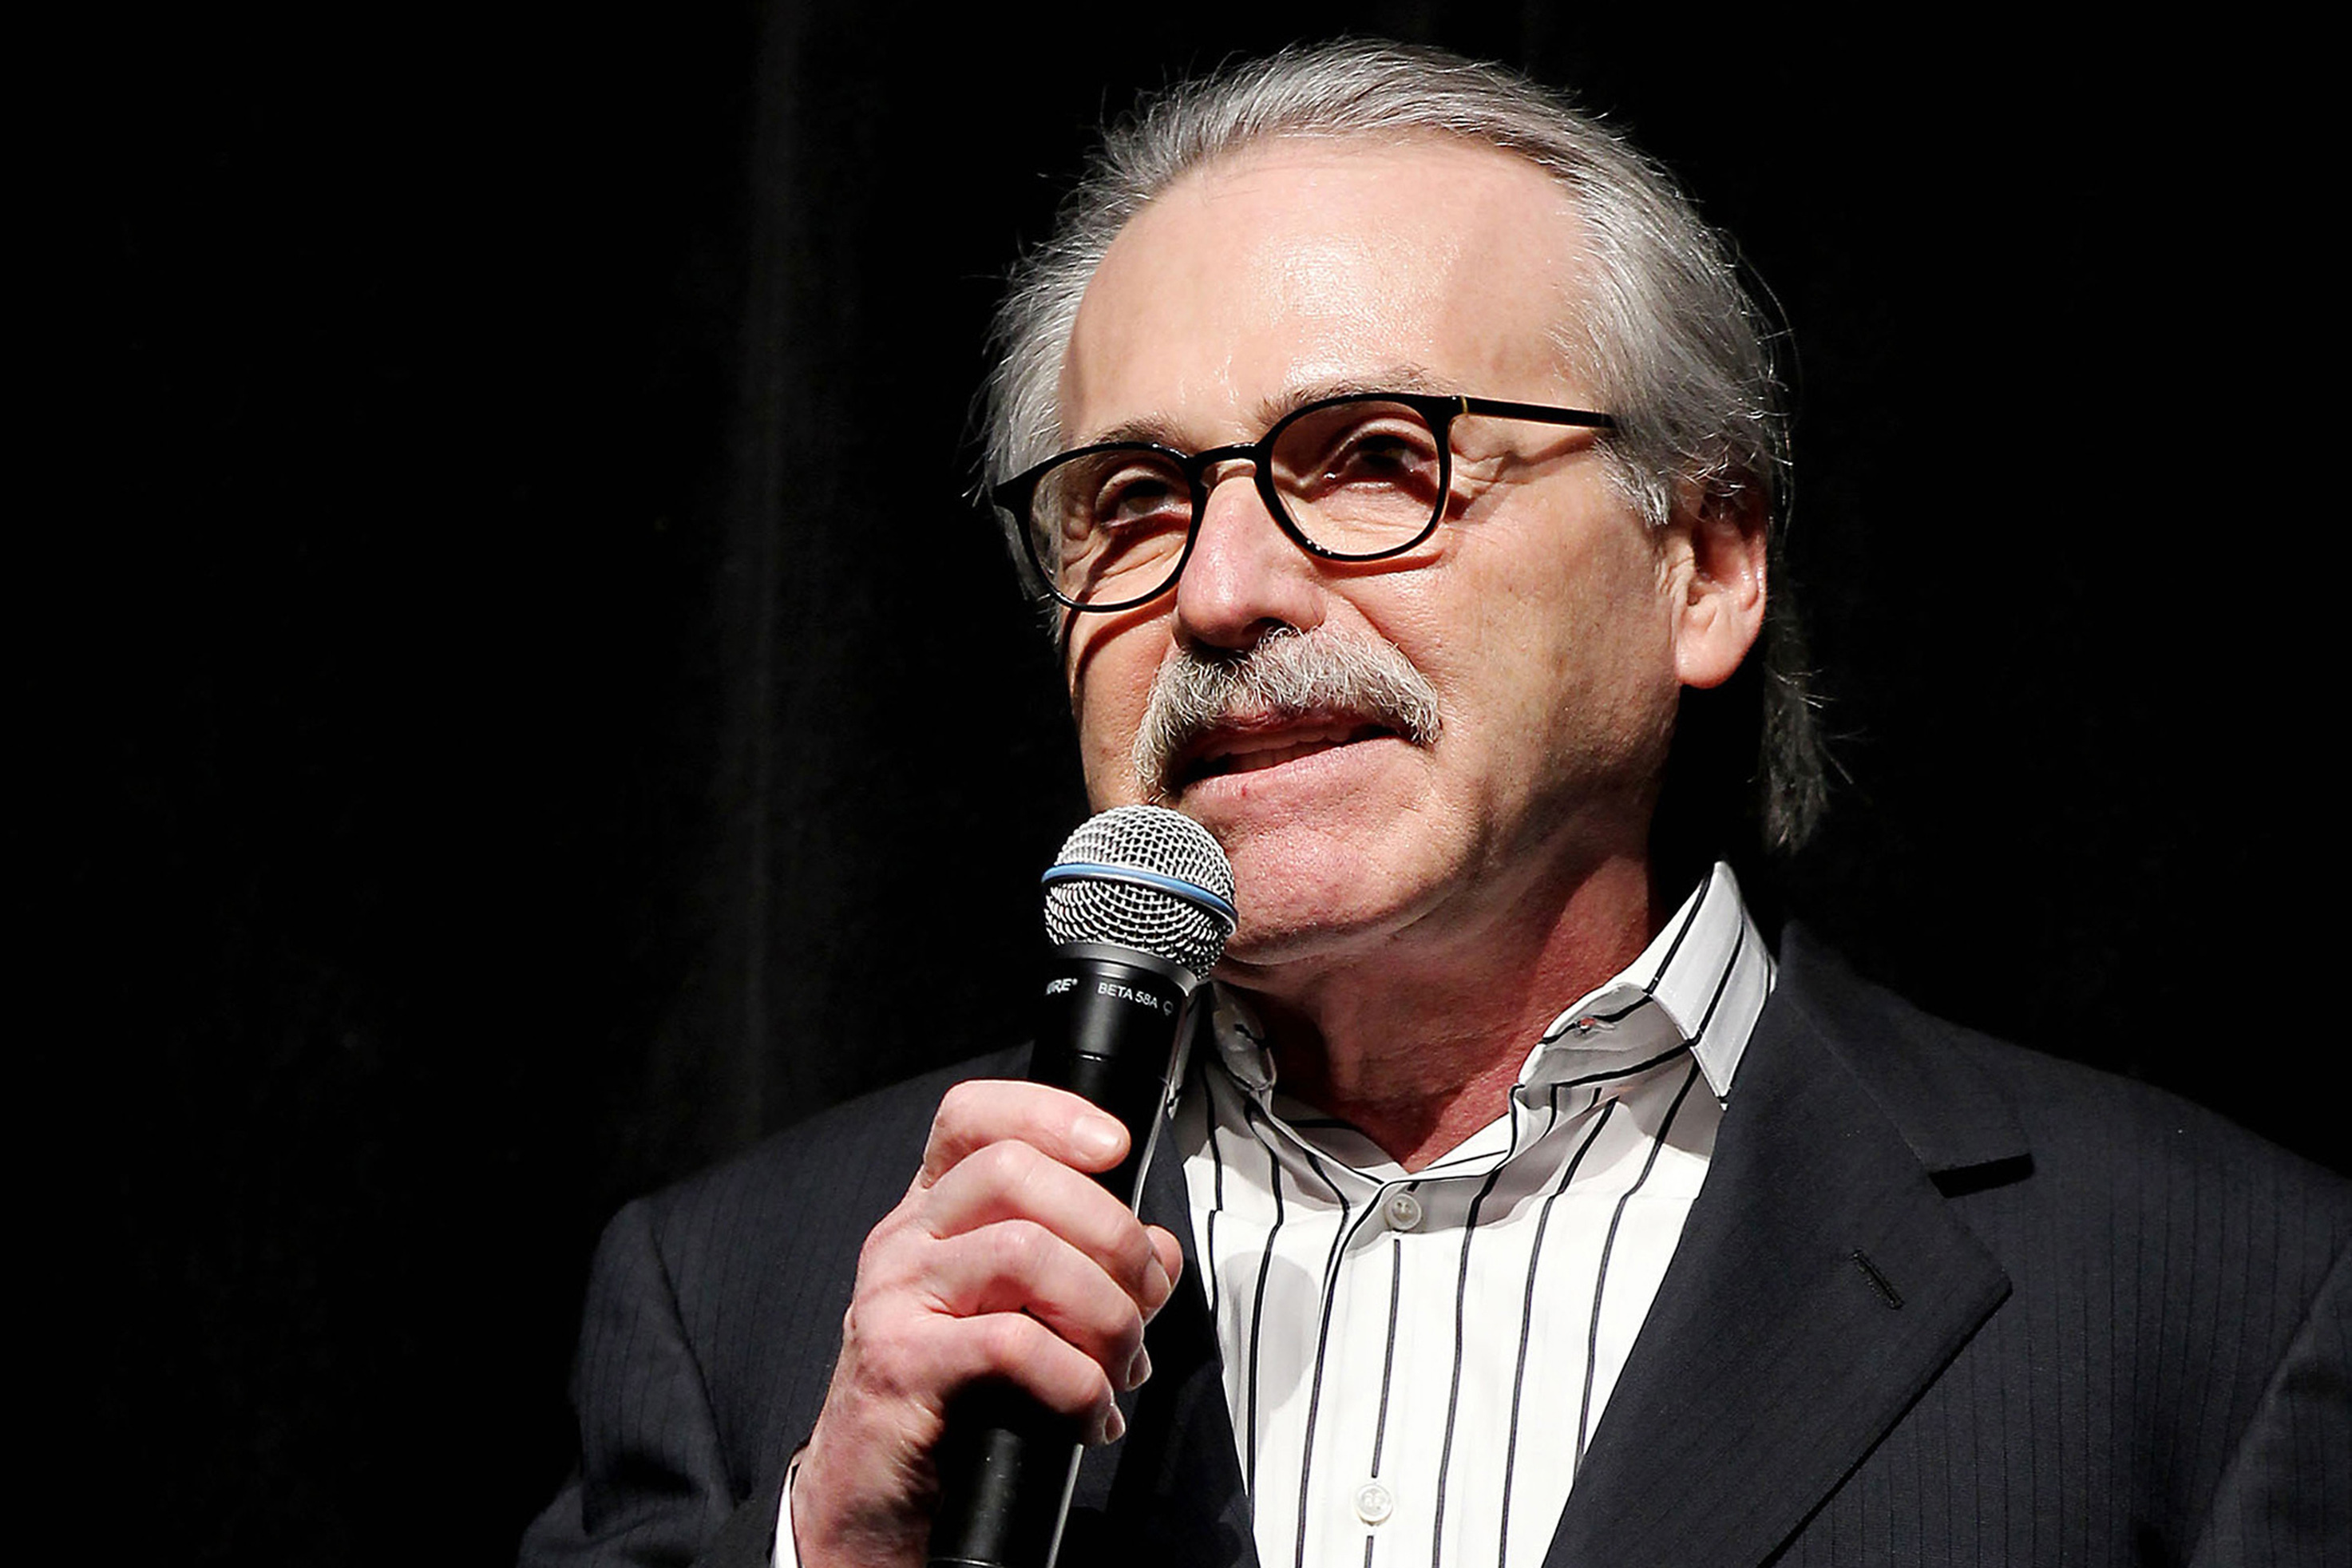 David Pecker speaks at an event in 2014.